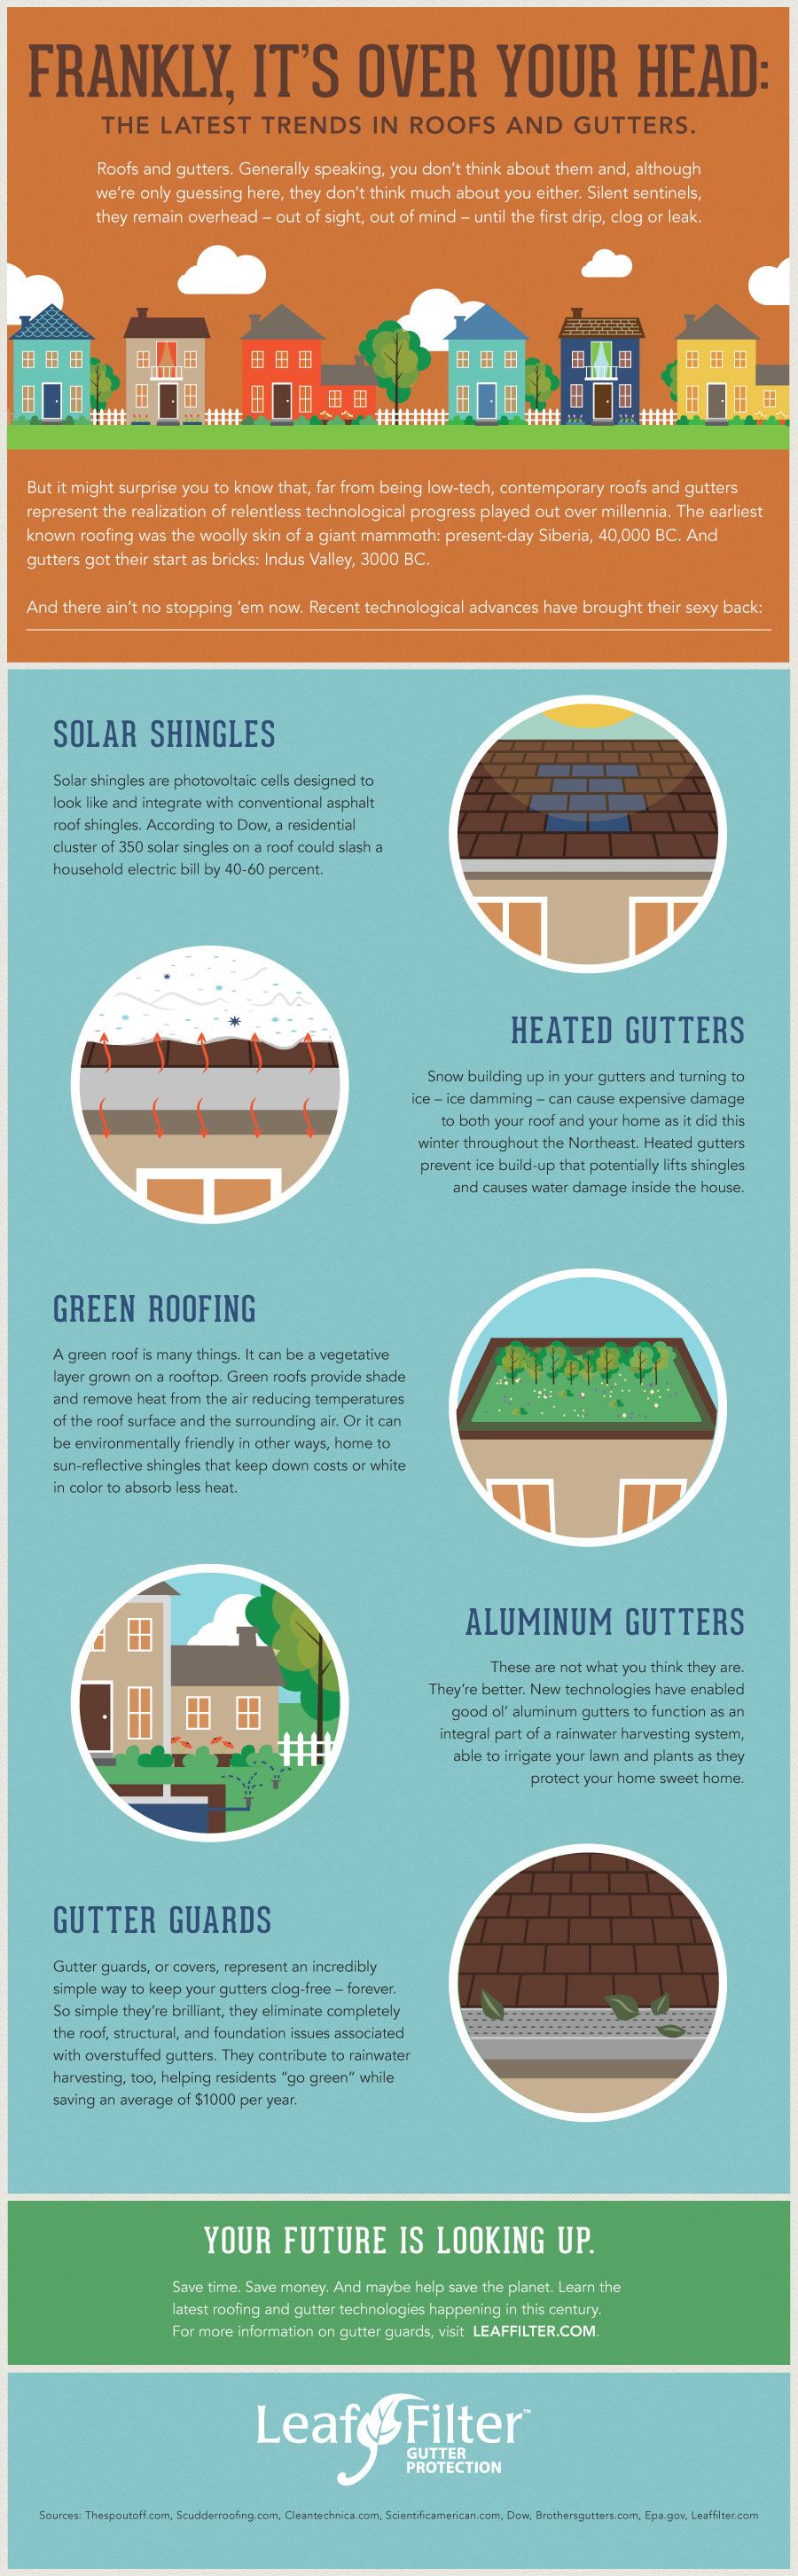 leaffilter roofs and gutters trends